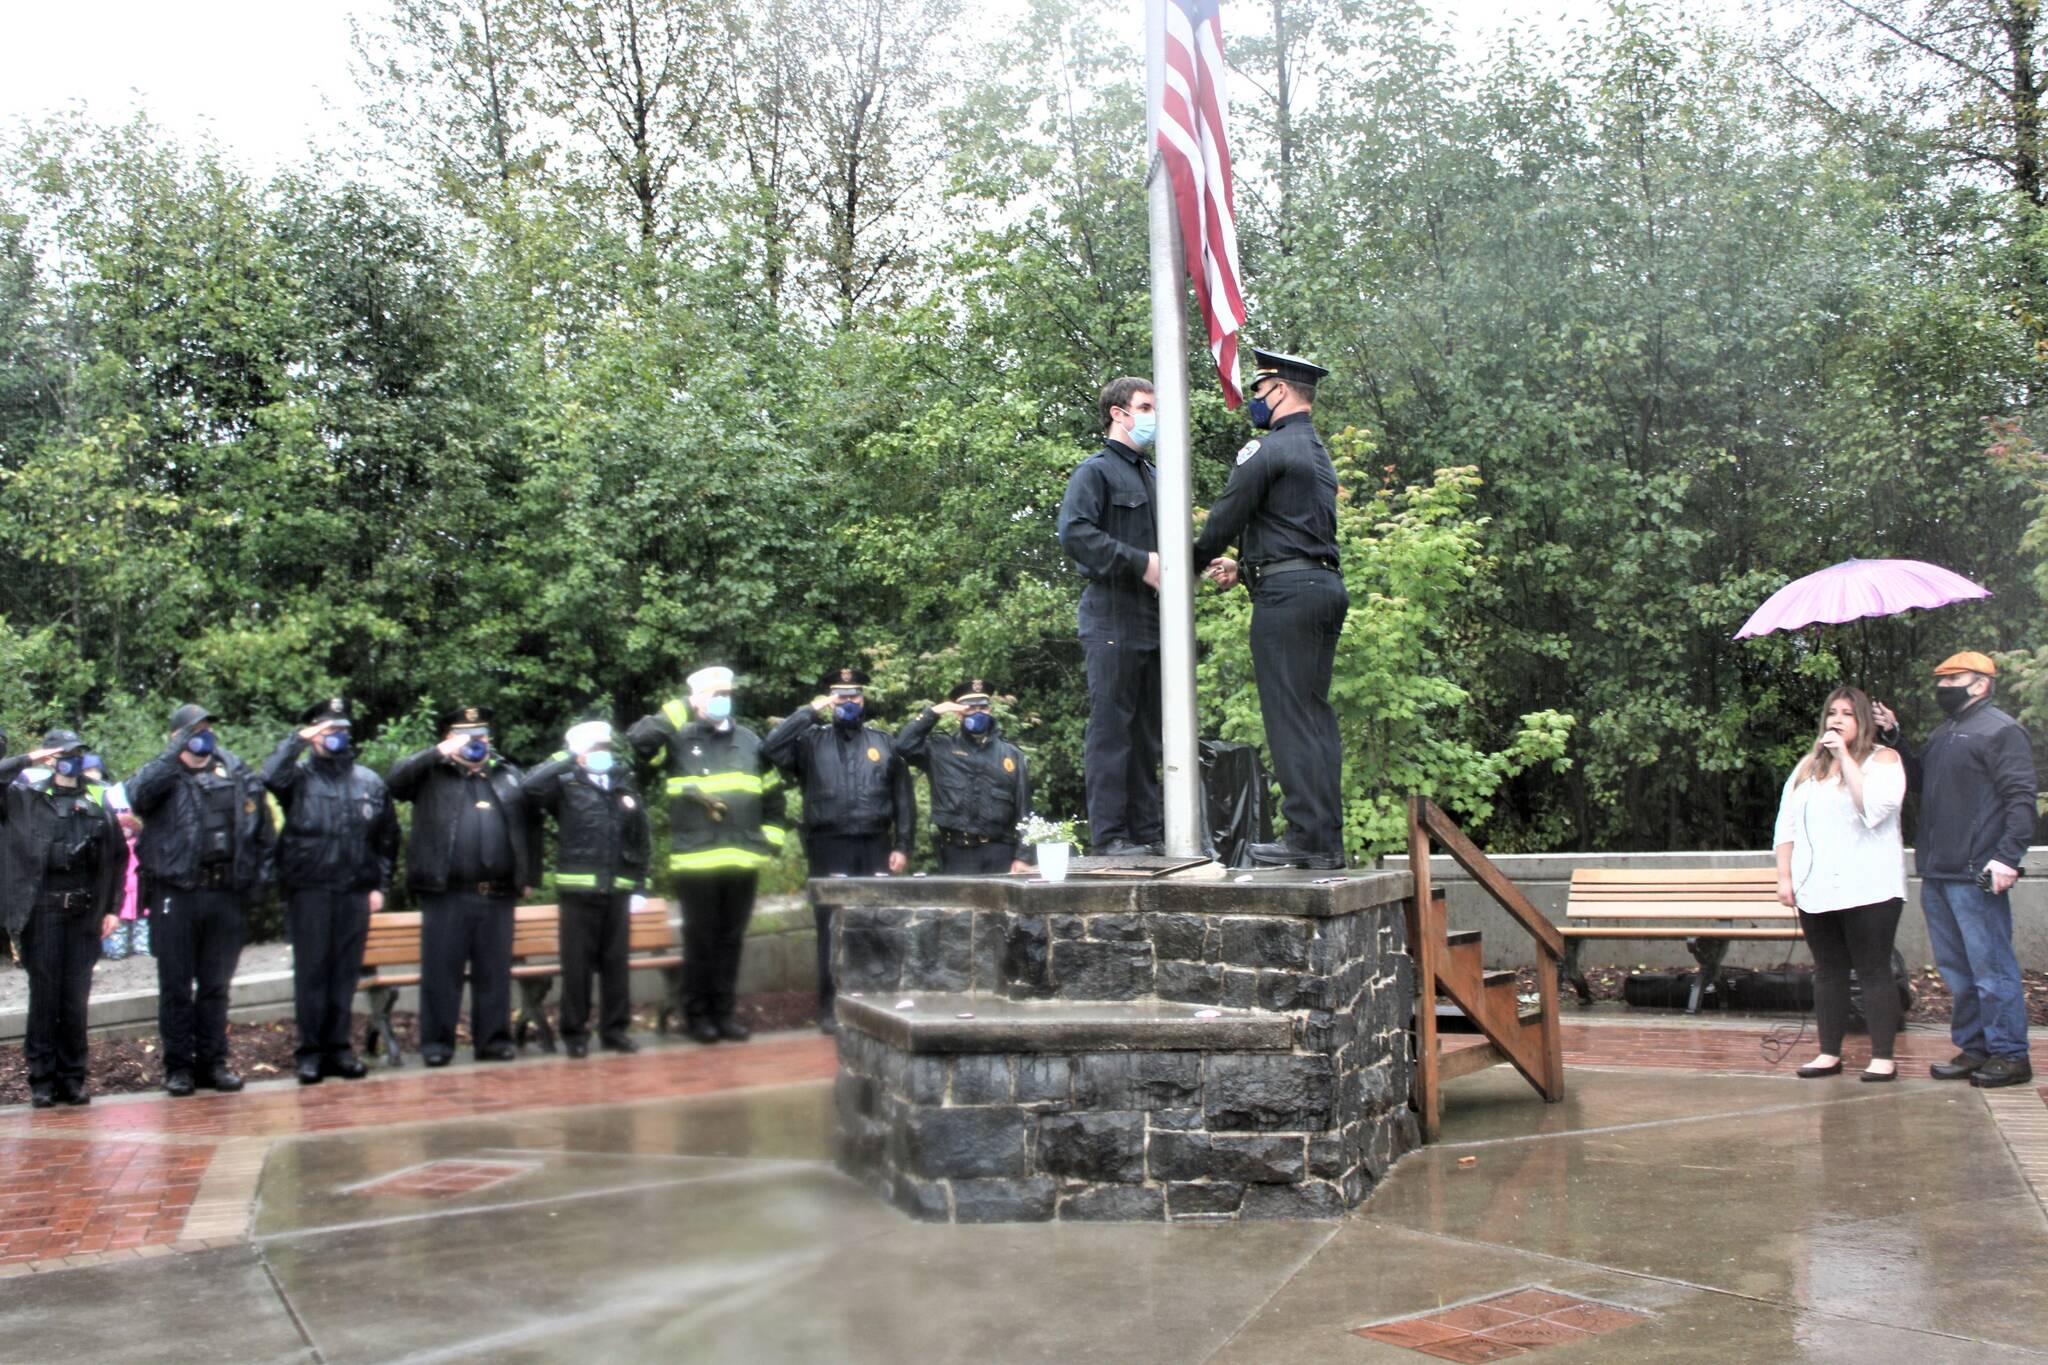 Under heavy rain and low clouds overhead, a few hundred people gathered in Riverside Rotary Park Saturday morning for solemn remembrance and honor the 20th anniversary of the 9/11 terrorist attacks. To honor the fall of the first tower at 9:59 a.m., officers quickly raised an American flag and then lowered it to half-mast while Alyssa Fischer sang the National Anthem. (Dana Zigmund/Juneau Empire)